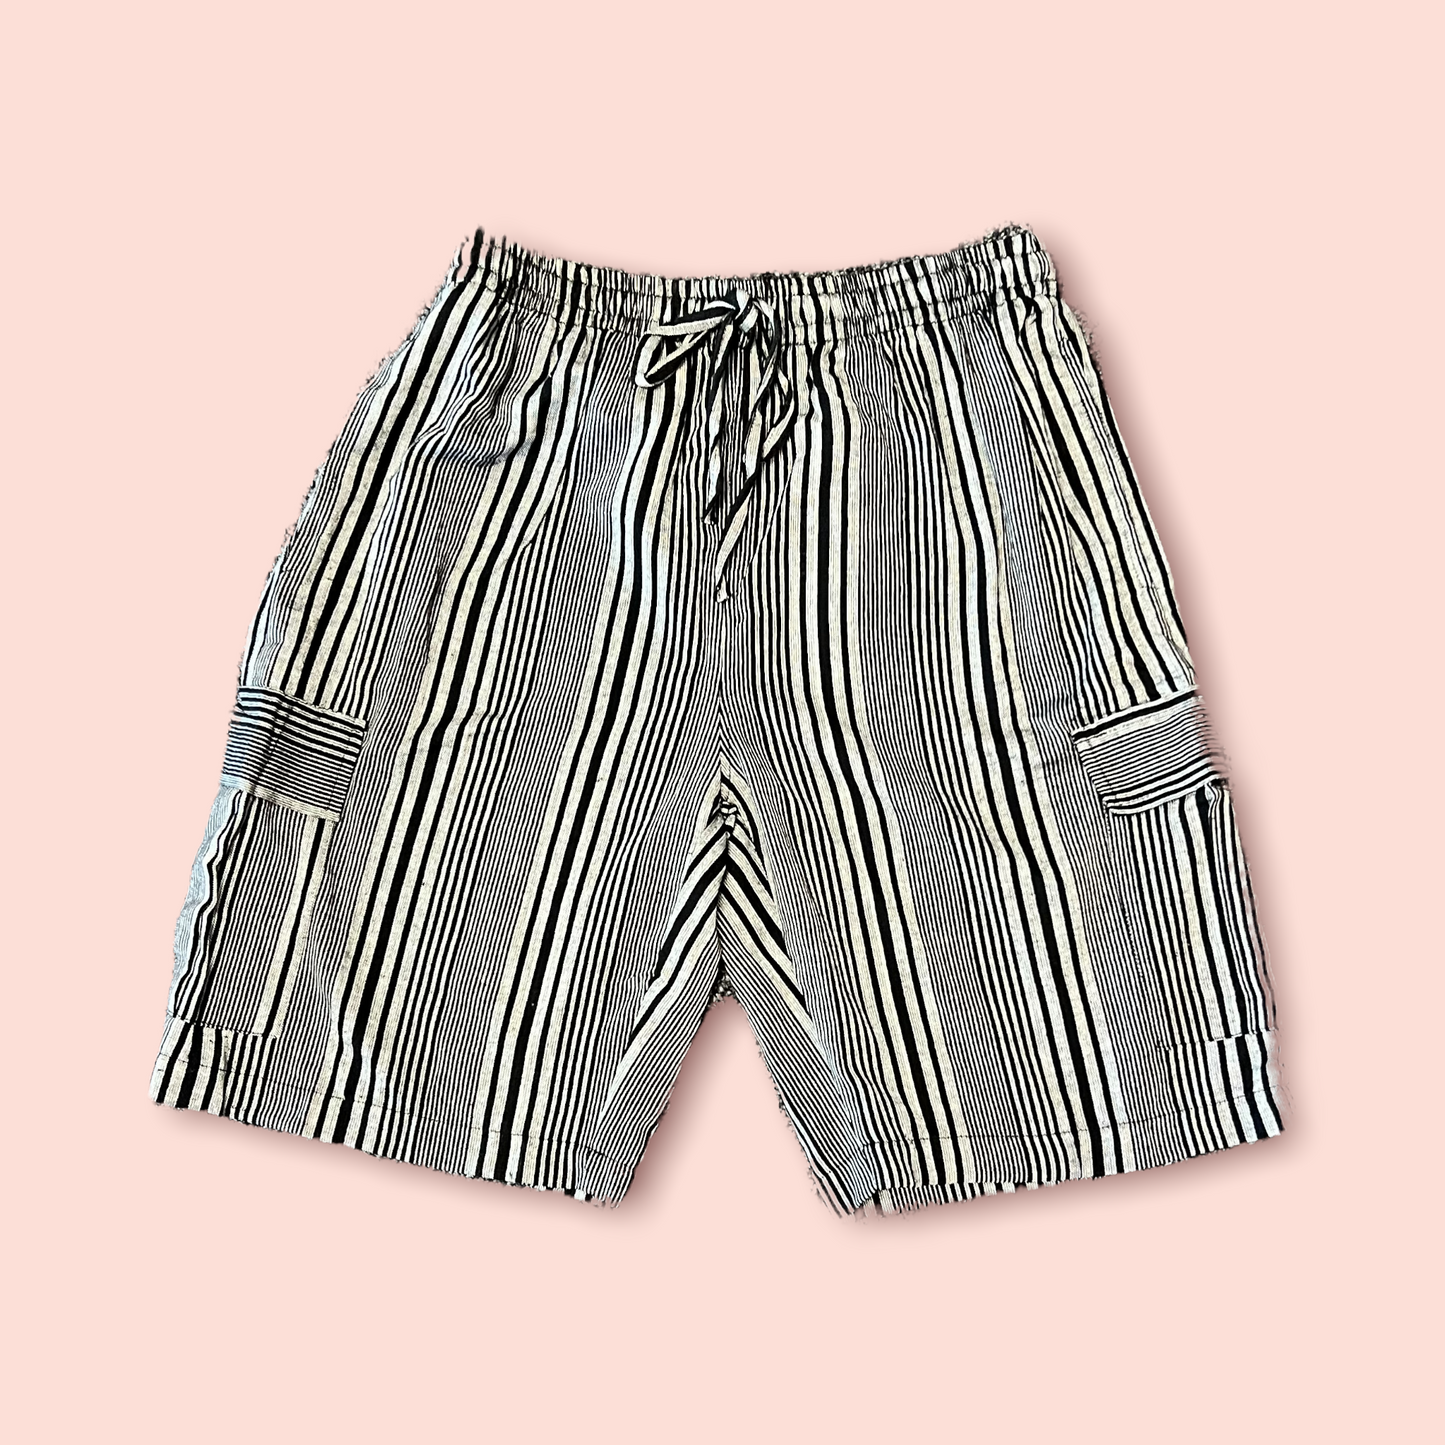 Black Men's Striped Shorts With Pockets